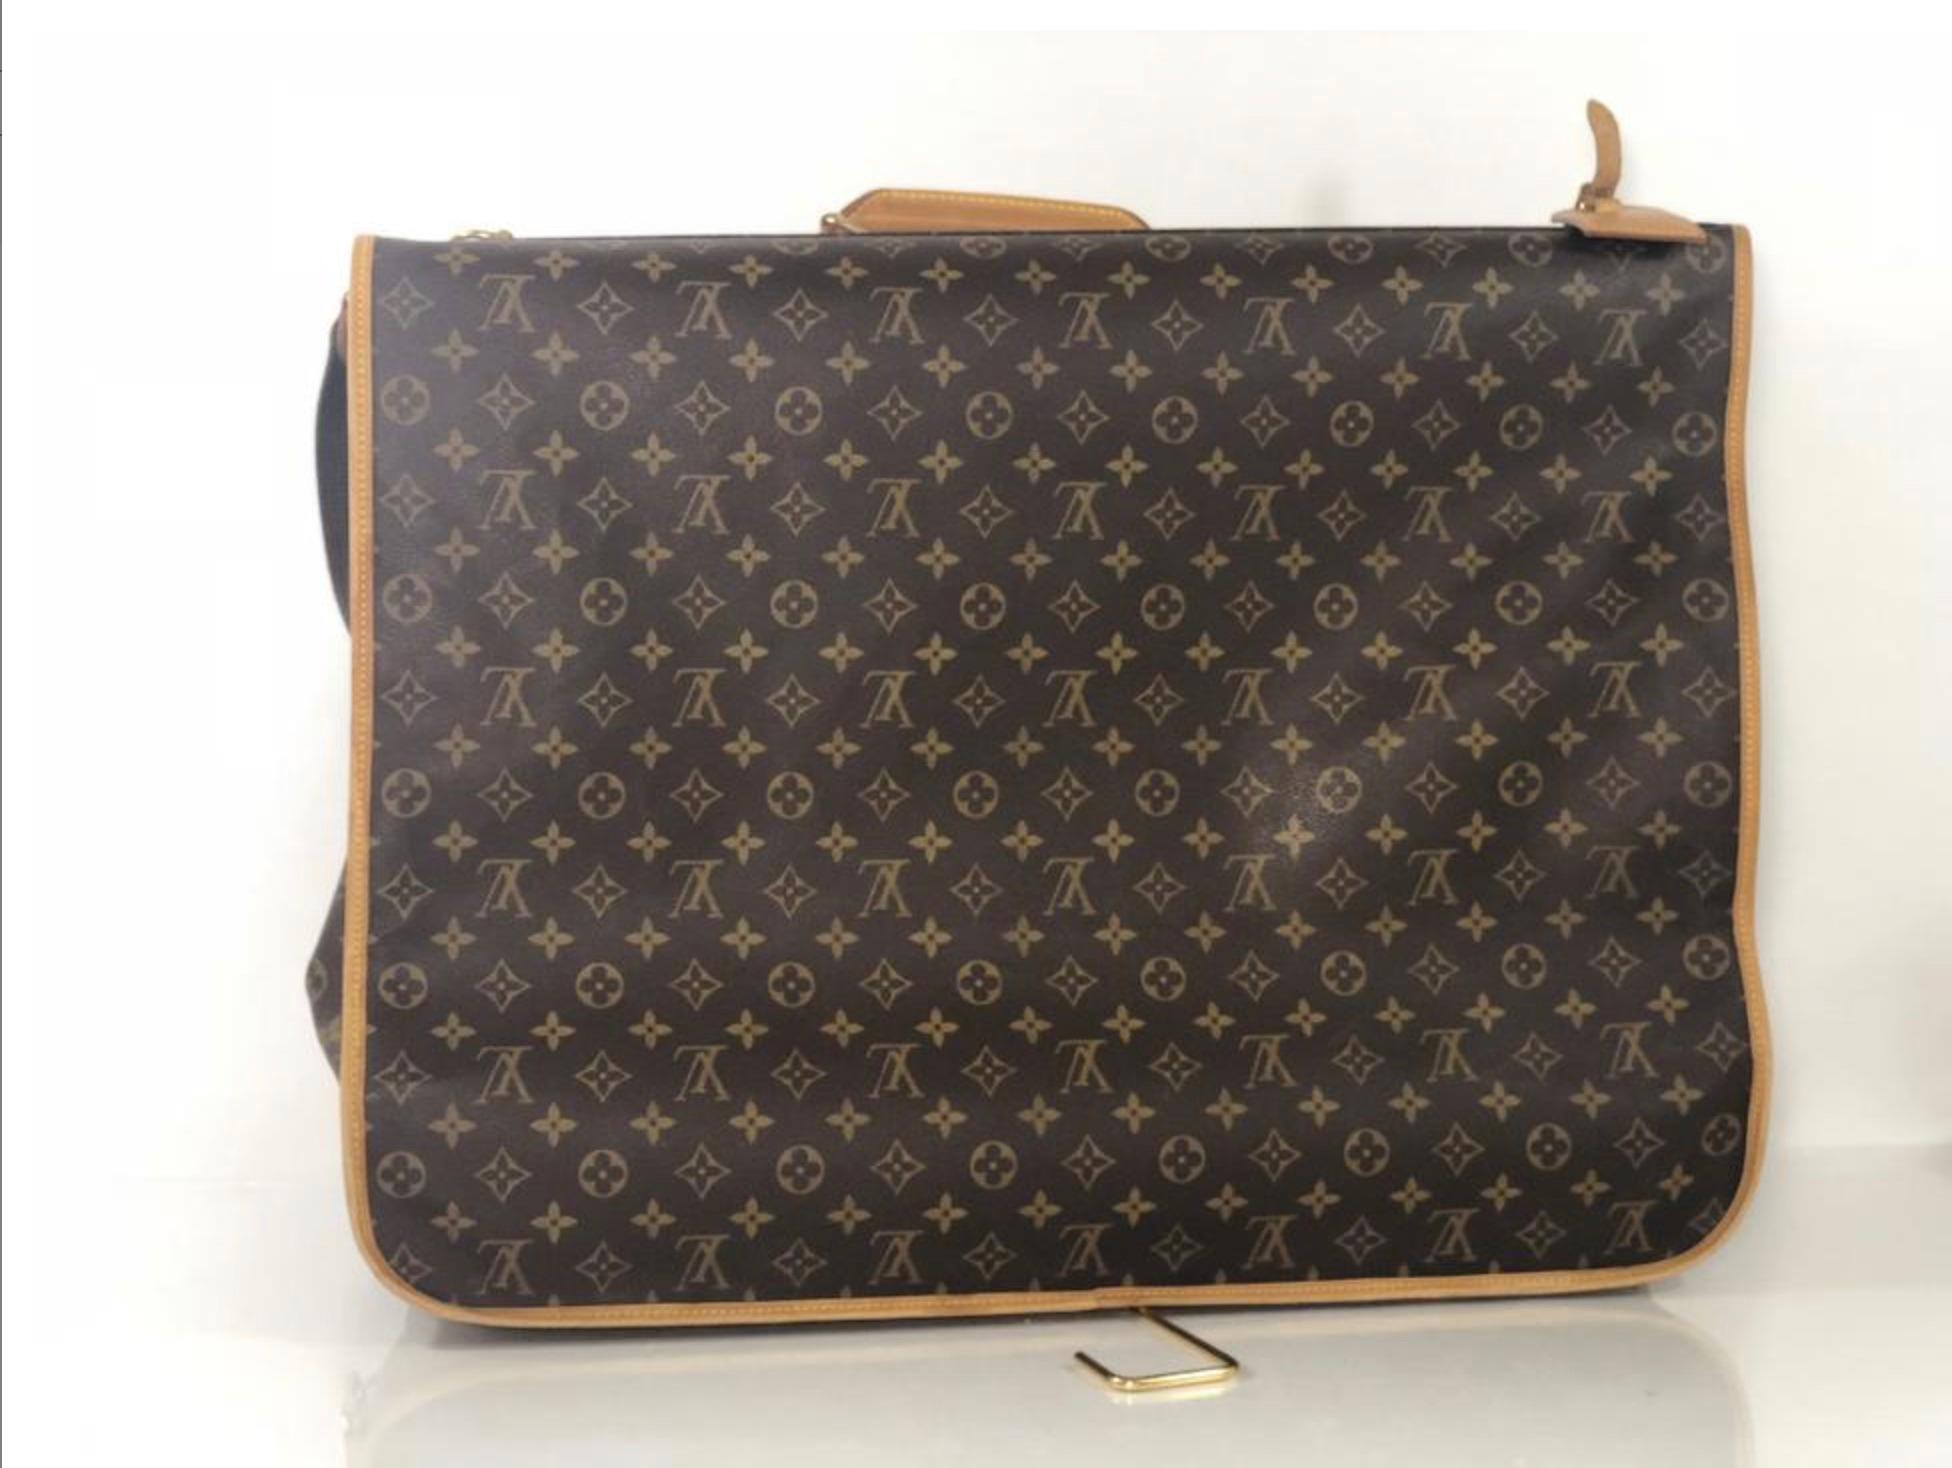  Louis Vuitton Monogram Portable Cabine Garment Cover Travel Handbag In Good Condition For Sale In Saint Charles, IL